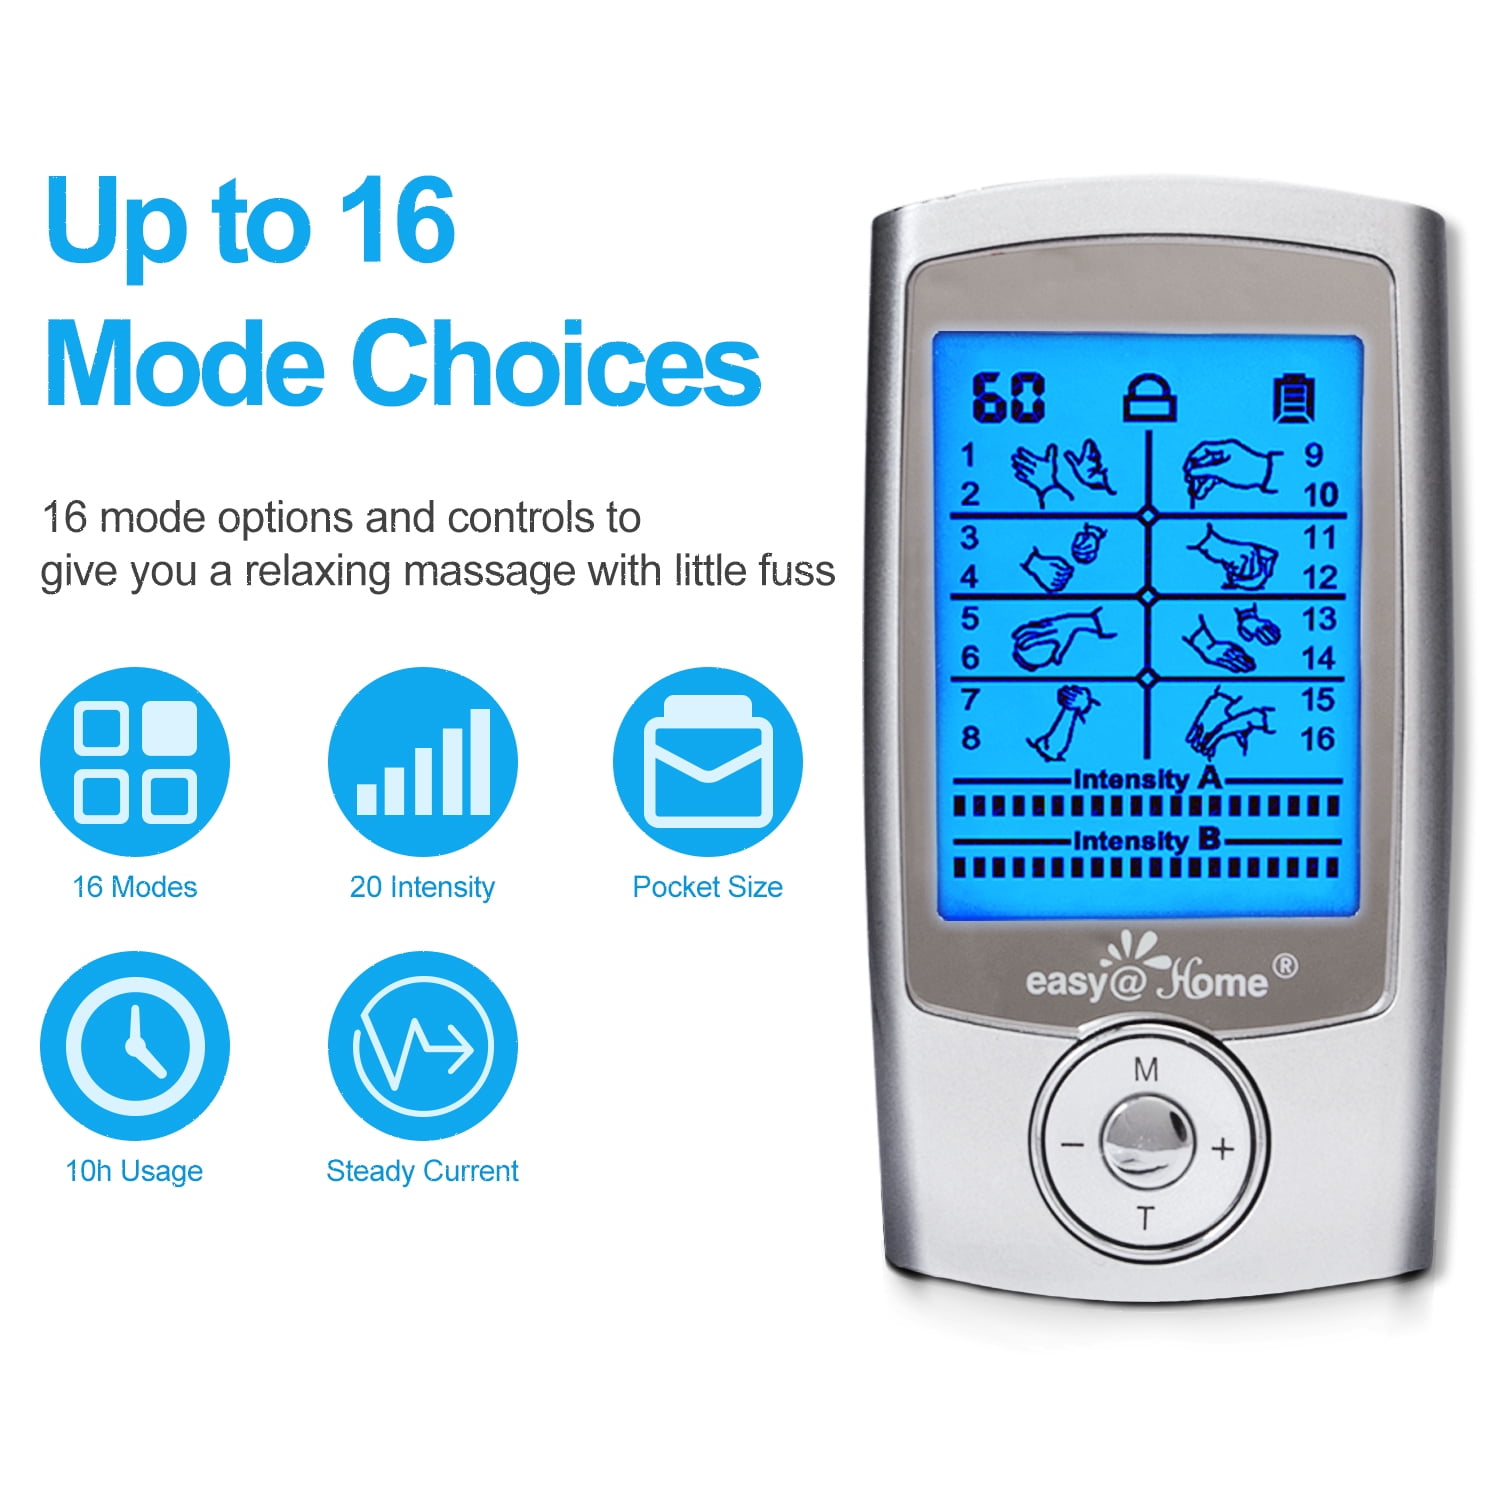 Easy@Home Wireless Rechargeable TENS Unit, FSA Eligible Muscle Stimulator  and Pain Relief TENS Pulse Massager - FDA Cleared for OTC Cleared Pain